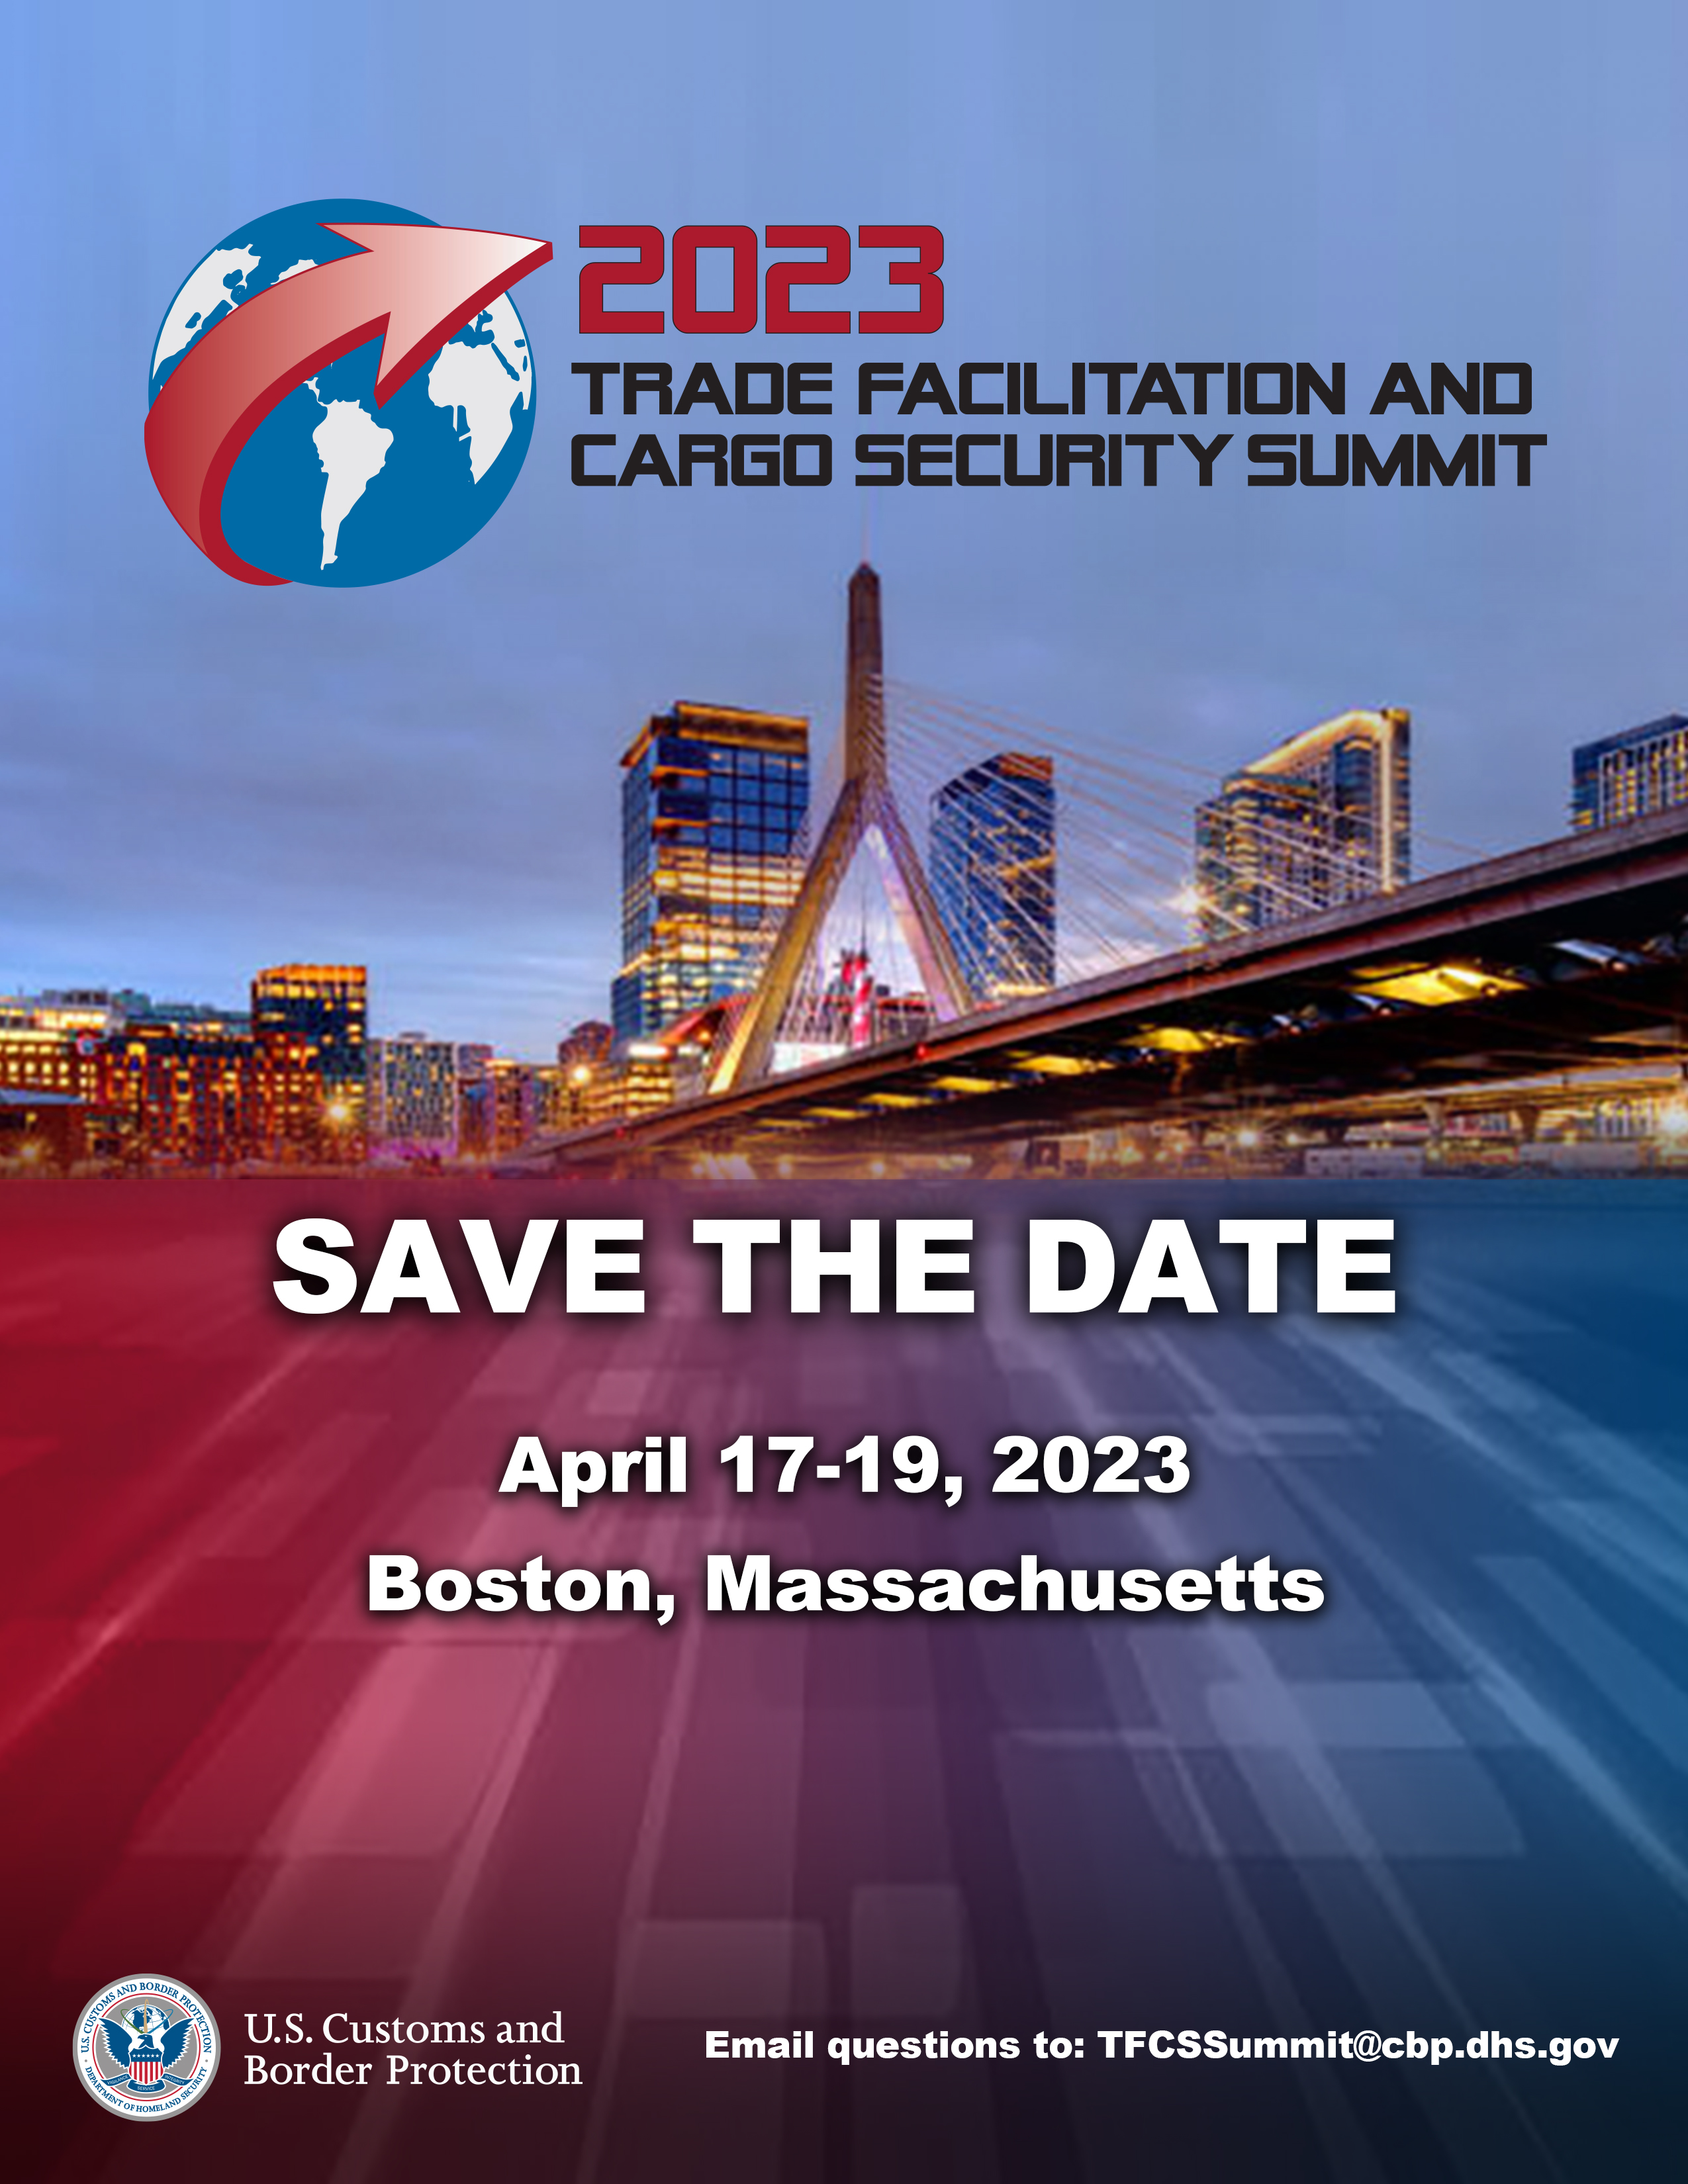 2023 Trade Facilitation and Cargo Security Summit Save The Date, April 17-19, 2023, Boston, Massachusetts flyer decortive image